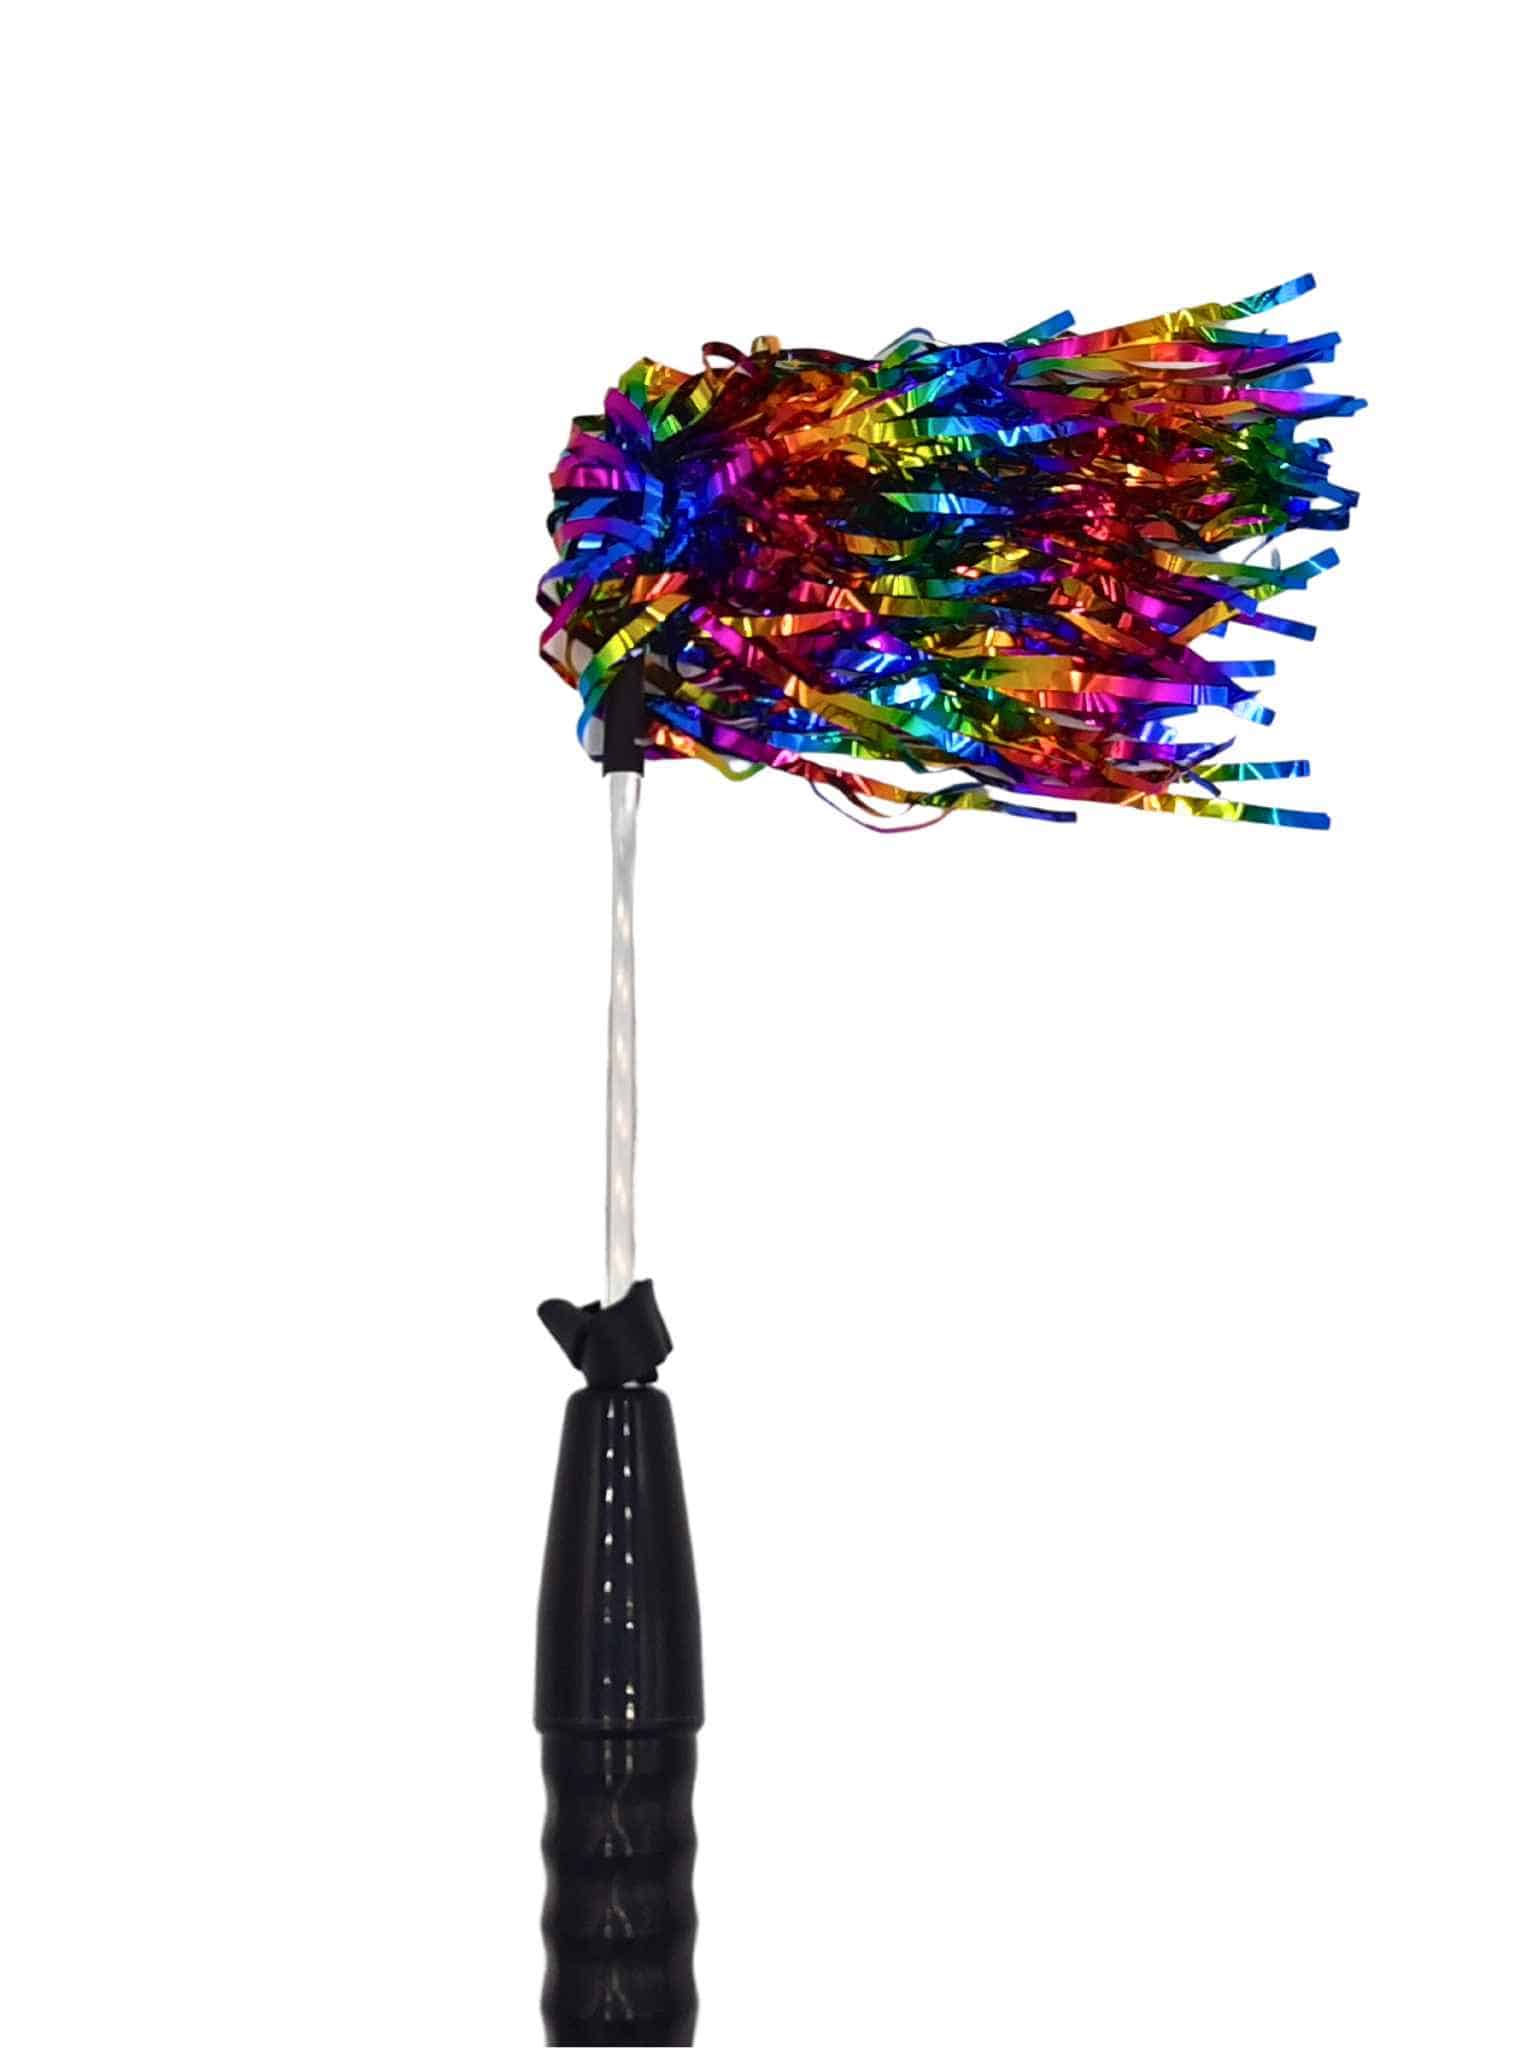 The violet wand with the Festive Mylar PomPom for Violet Wand.